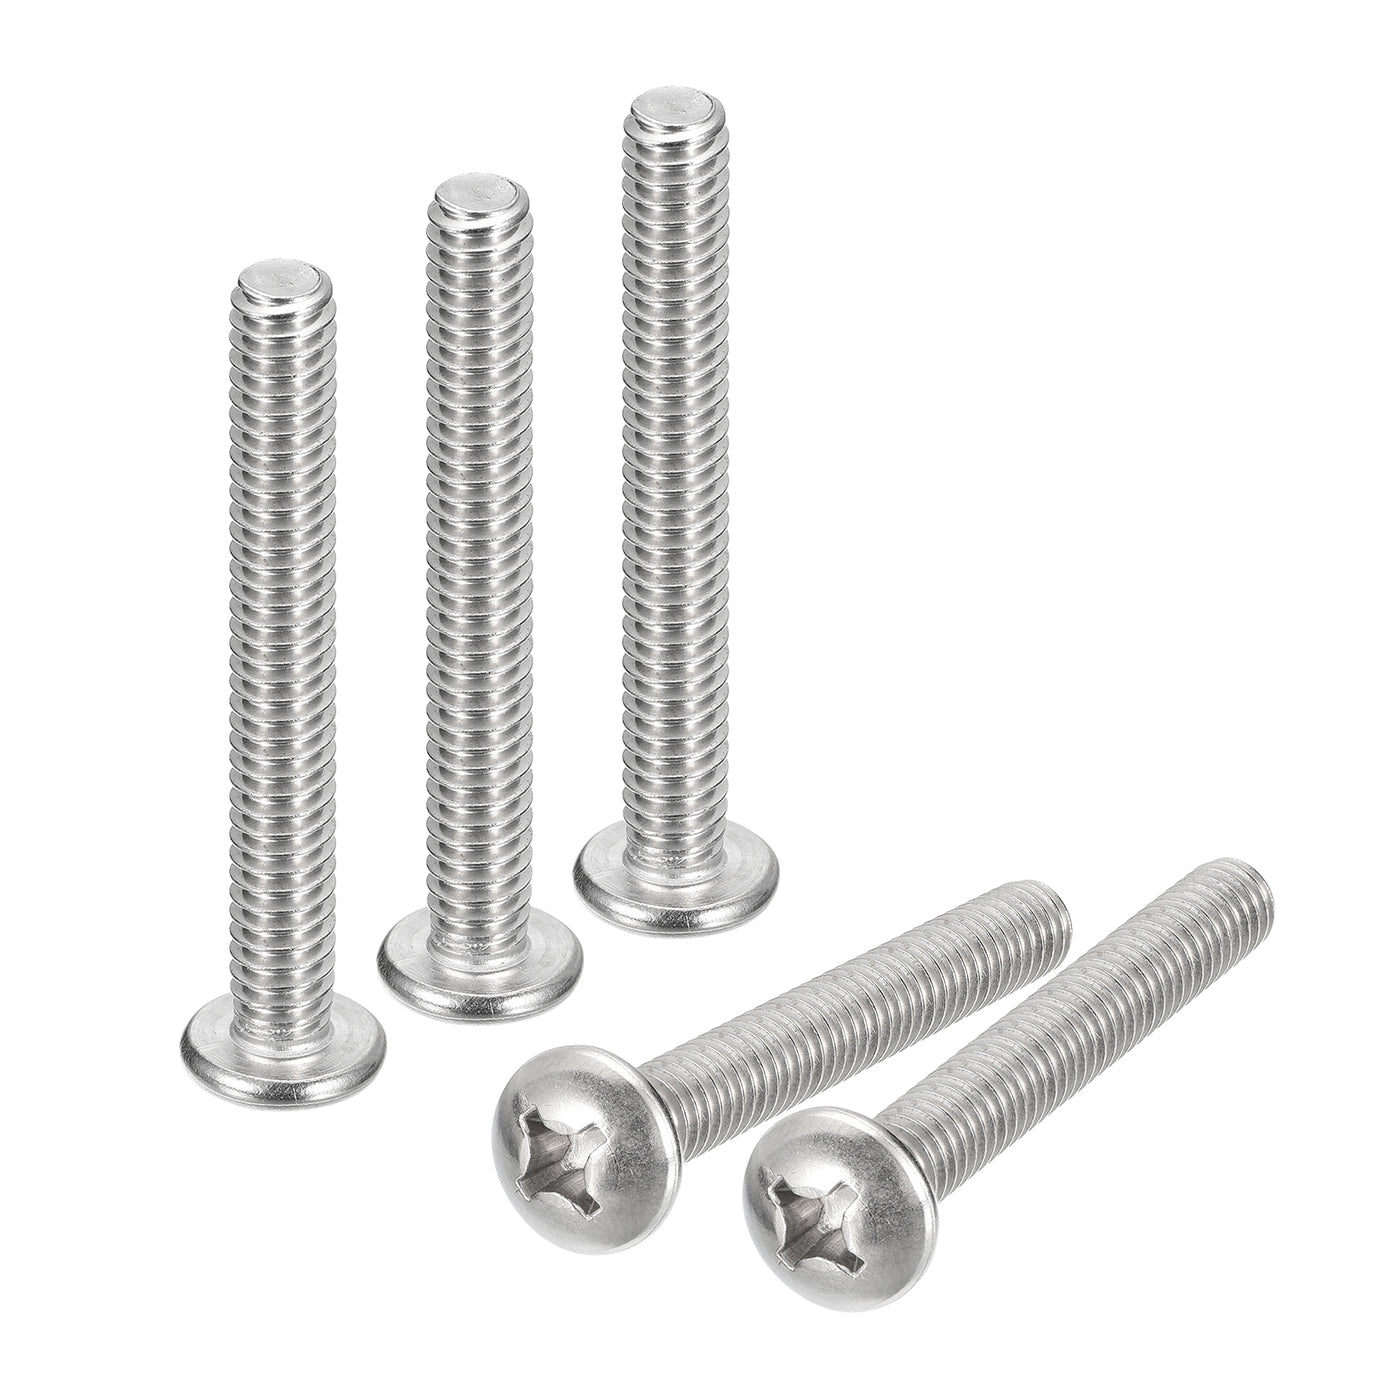 uxcell Uxcell 1/4-20x2-1/2" Pan Head Machine Screws, Stainless Steel 18-8 Screw, Pack of 50